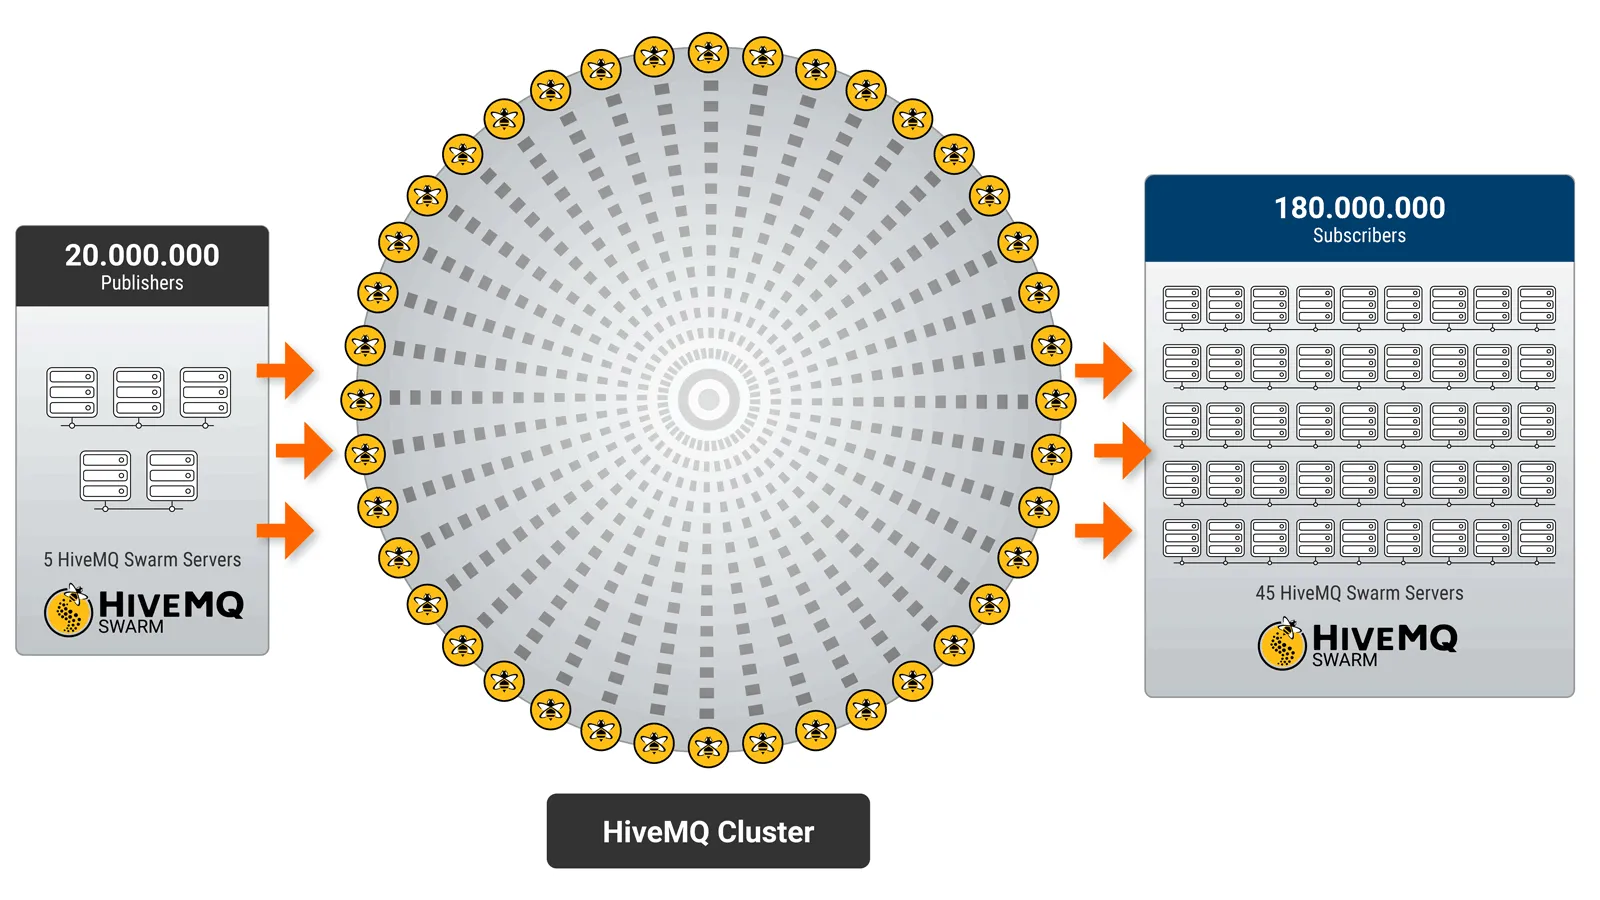 Hyperscale with HiveMQ: Learn About Scale From Our 200 Million Benchmark